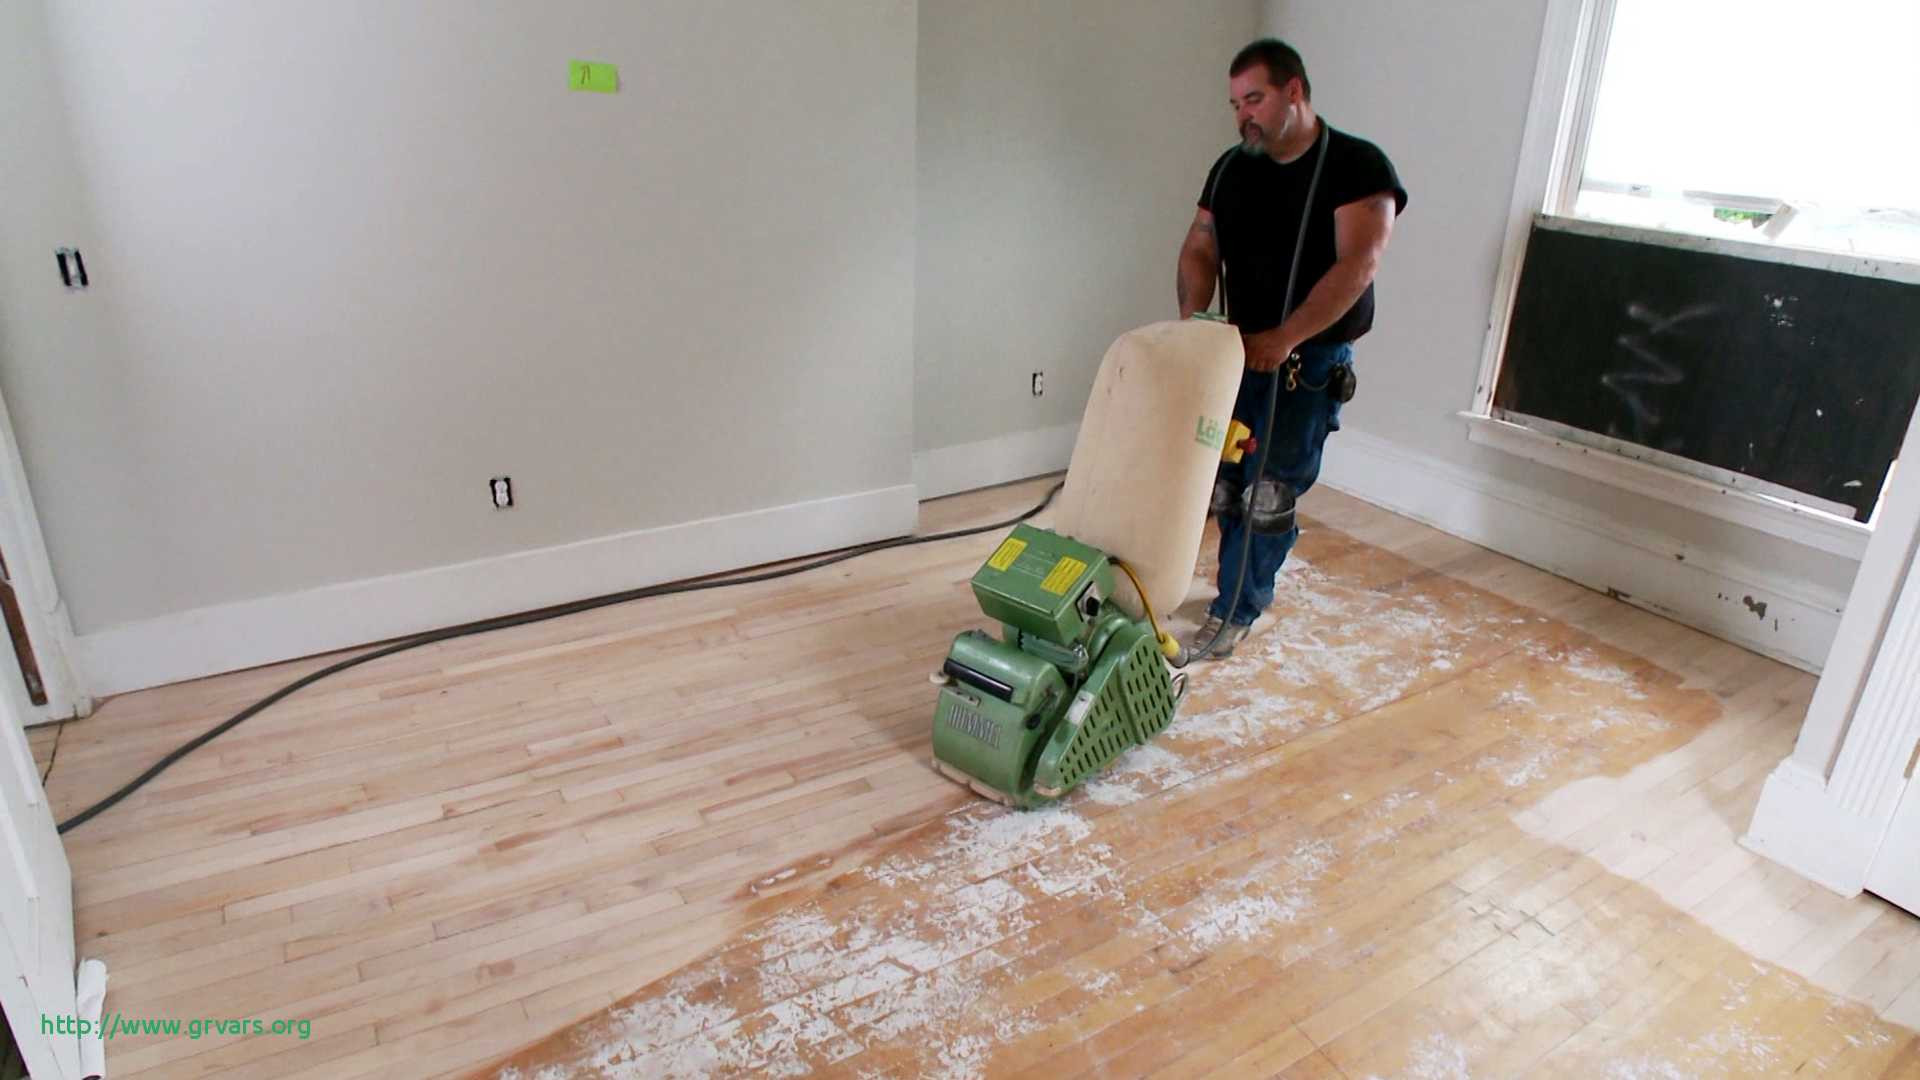 28 Recommended Hardwood Floor Care after Refinishing 2024 free download hardwood floor care after refinishing of how to clean old hardwood floors without sanding ac289lagant will inside how to clean old hardwood floors without sanding ac289lagant will refinishin